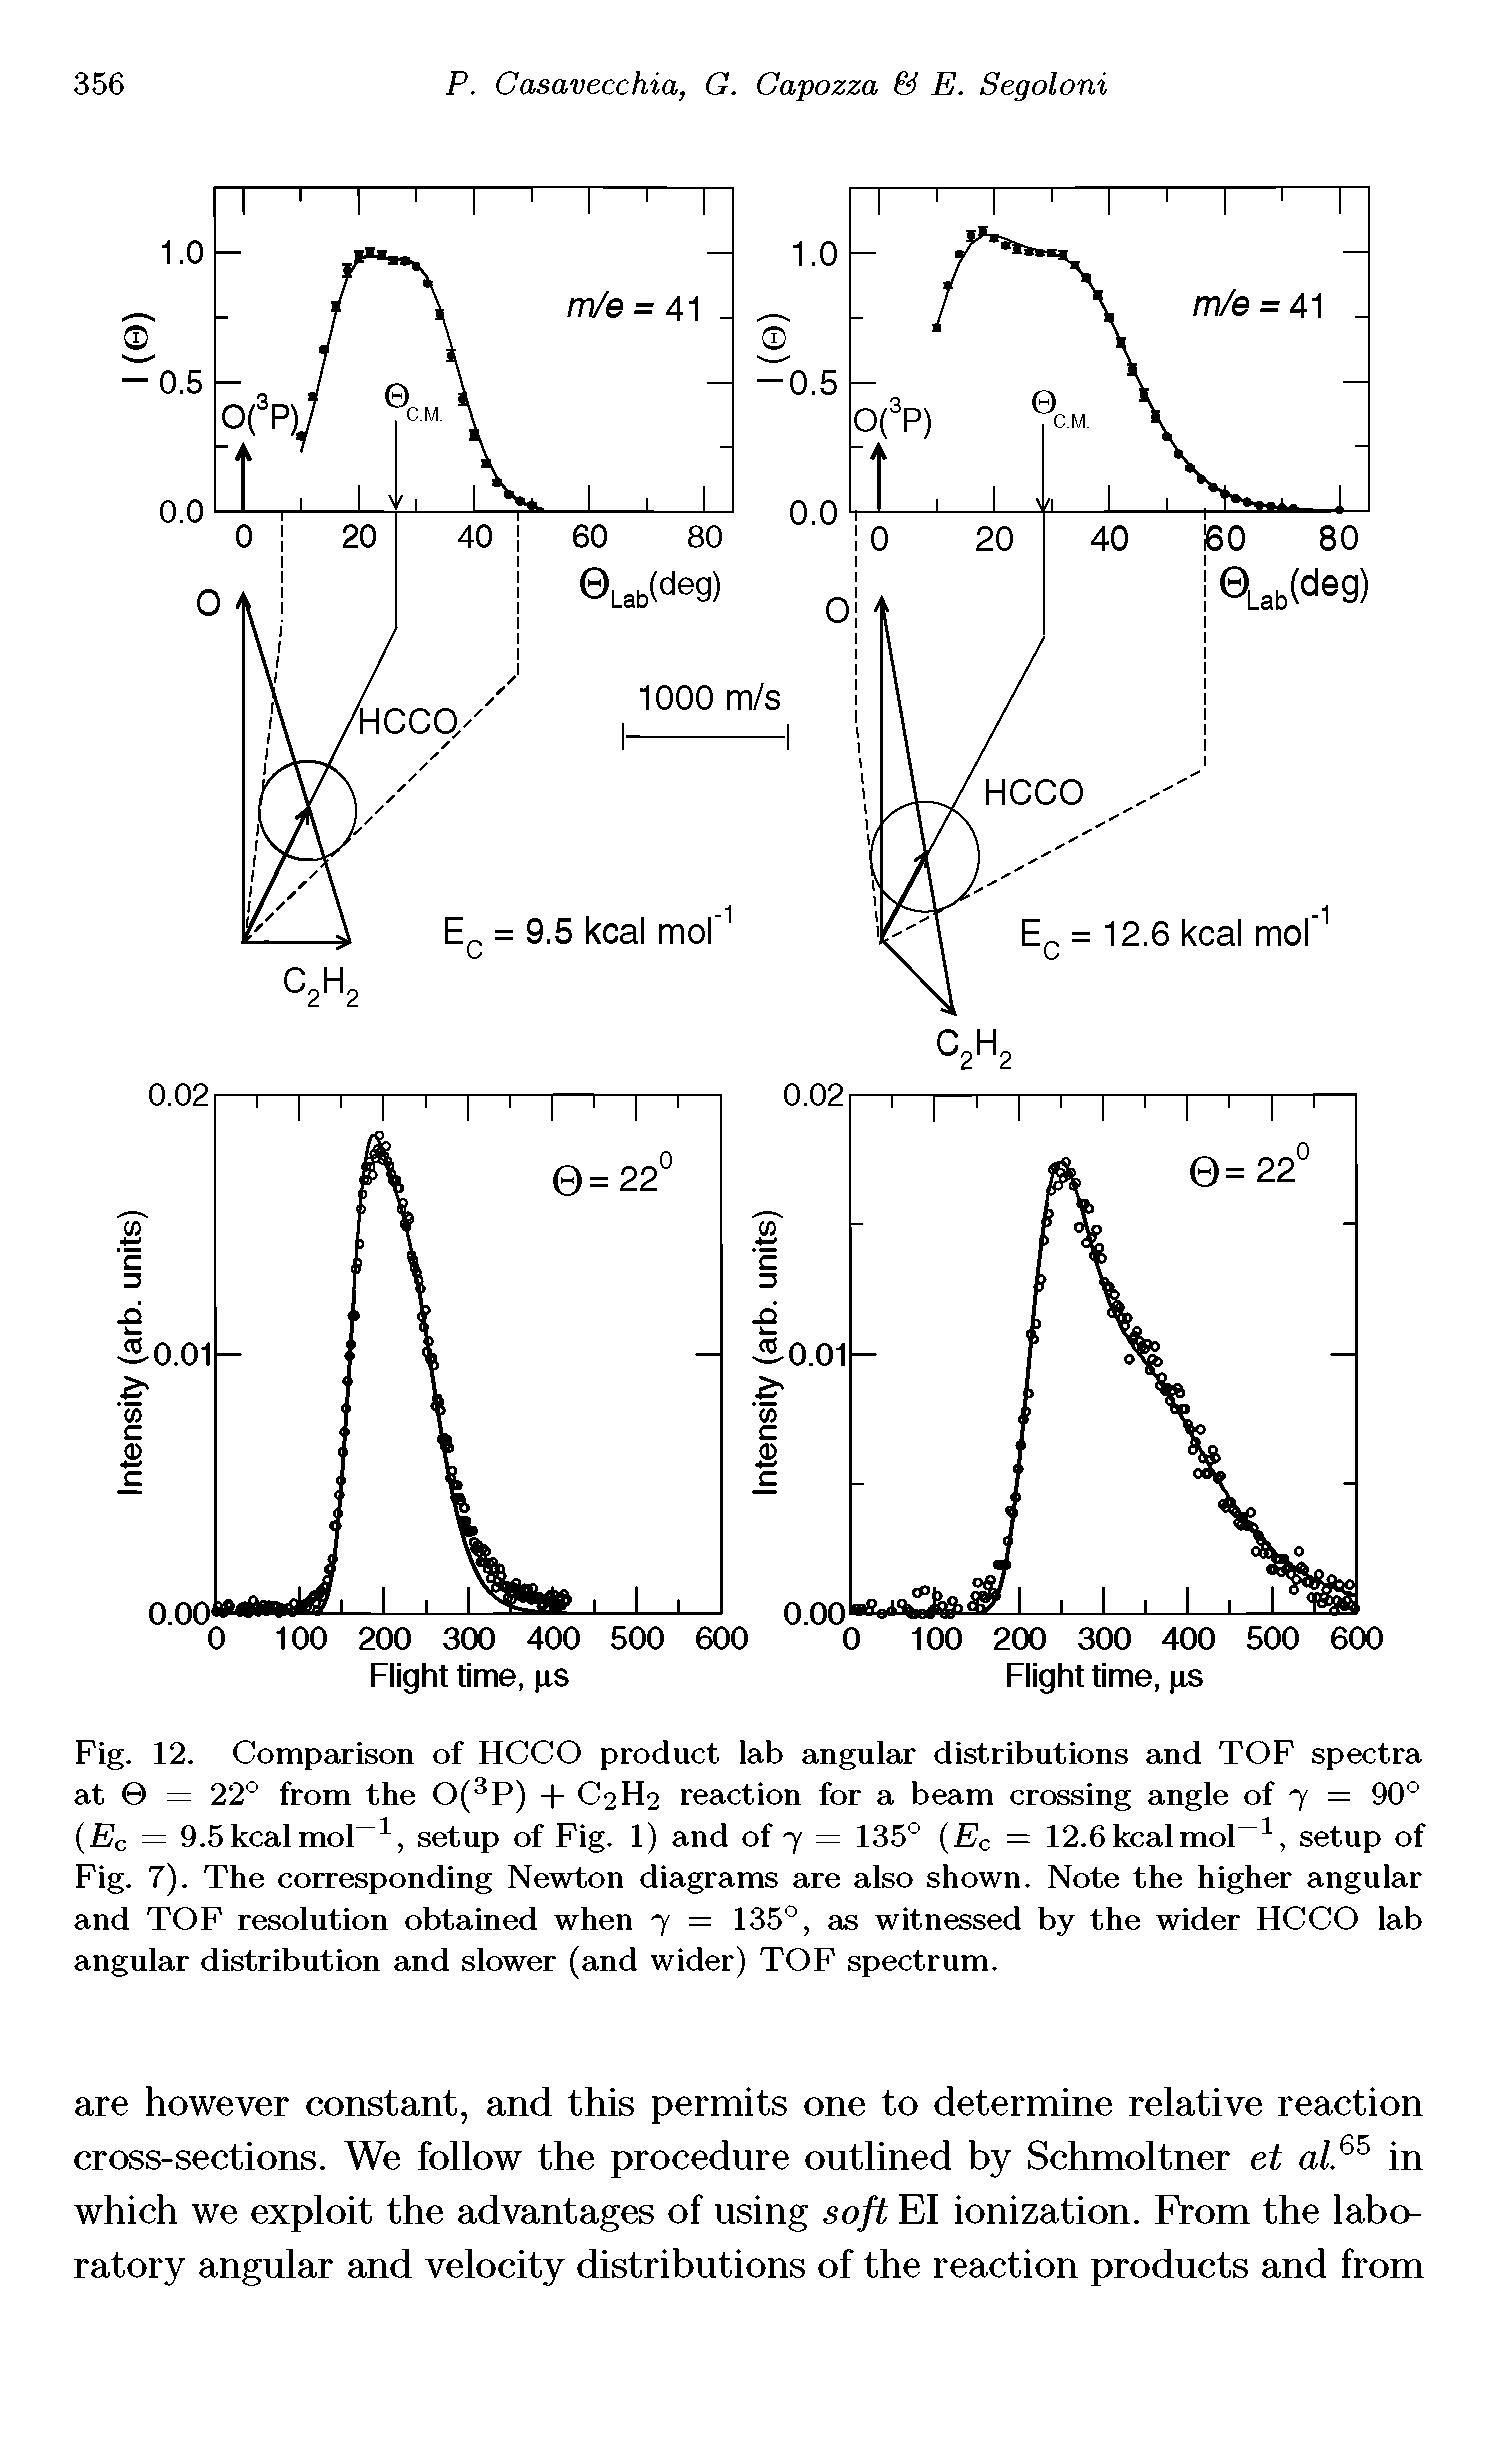 Fig. 12. Comparison of HCCO product lab angular distributions and TOF spectra at = 22° from the 0(3P) + C2H2 reaction for a beam crossing angle of 7 = 90° (Ec = 9.5 kcal mol 1, setup of Fig. 1) and of 7 = 135° (Ec = 12.6 kcal mol l, setup of Fig. 7). The corresponding Newton diagrams are also shown. Note the higher angular and TOF resolution obtained when 7 = 135°, as witnessed by the wider HCCO lab angular distribution and slower (and wider) TOF spectrum.